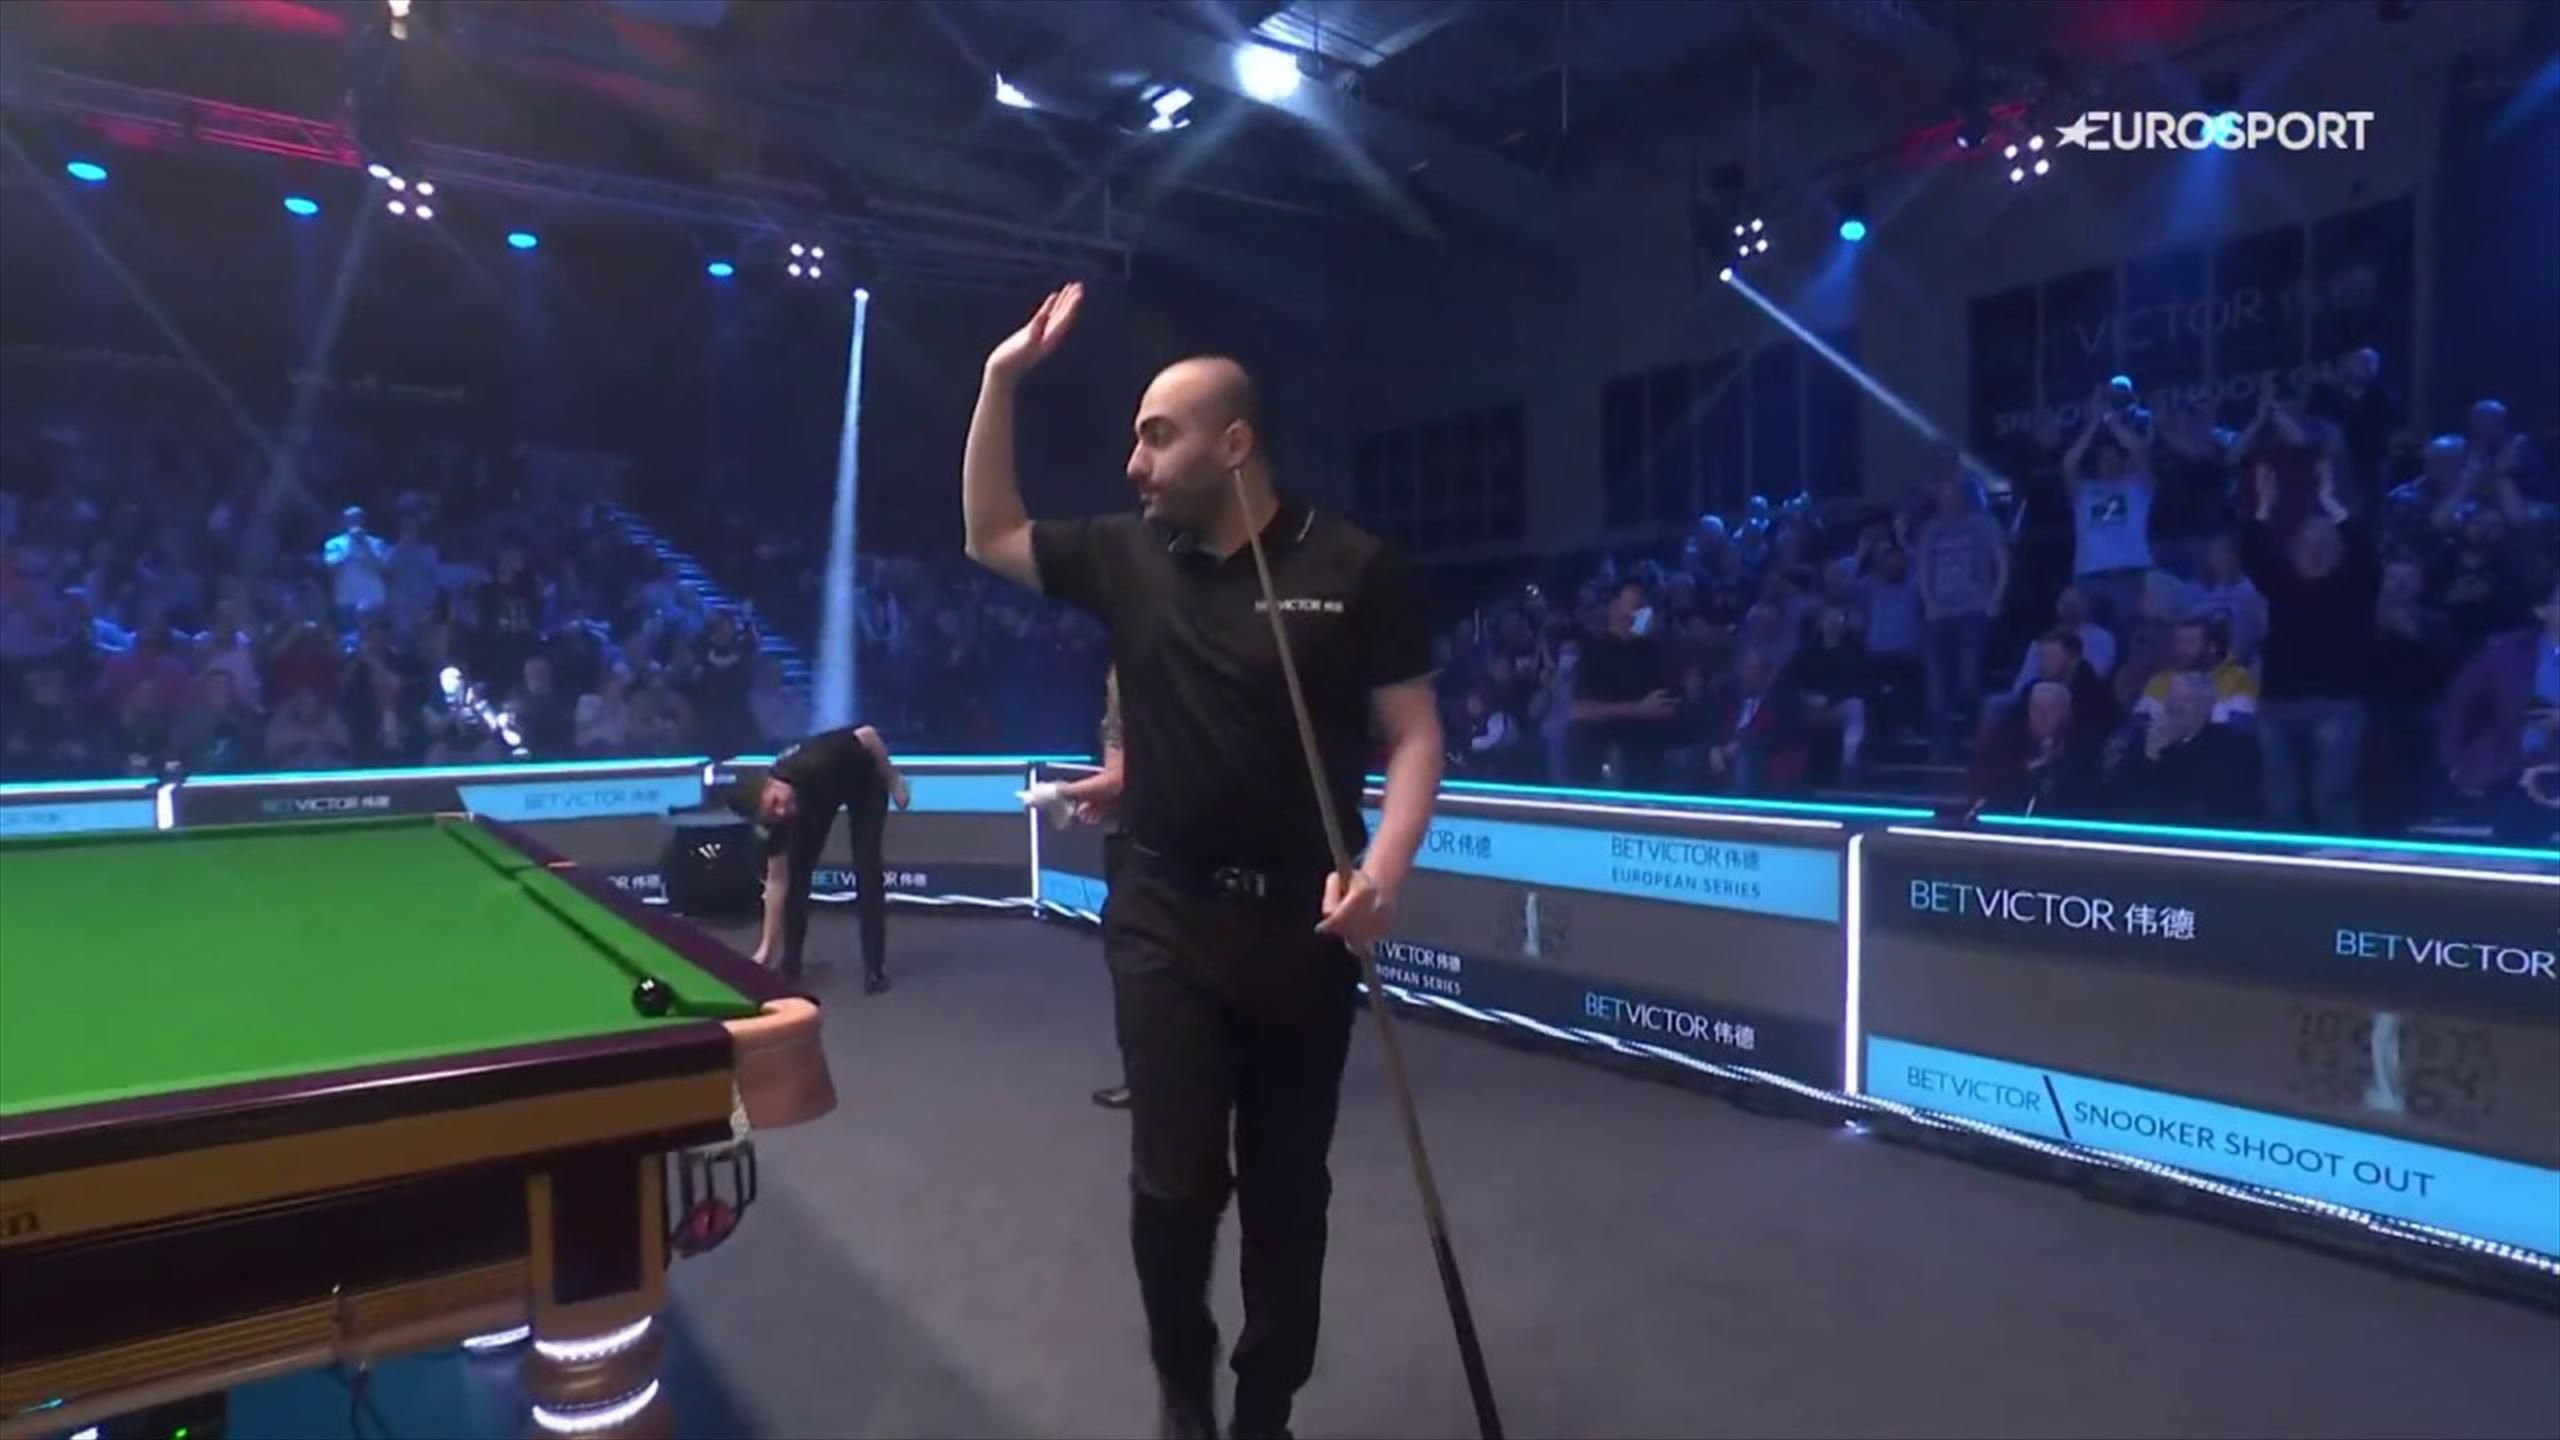 Hossein Vafaei thrills crowd at Snooker Shoot Out with 123 clearance in his win over Peter Devlin in round one - Snooker video